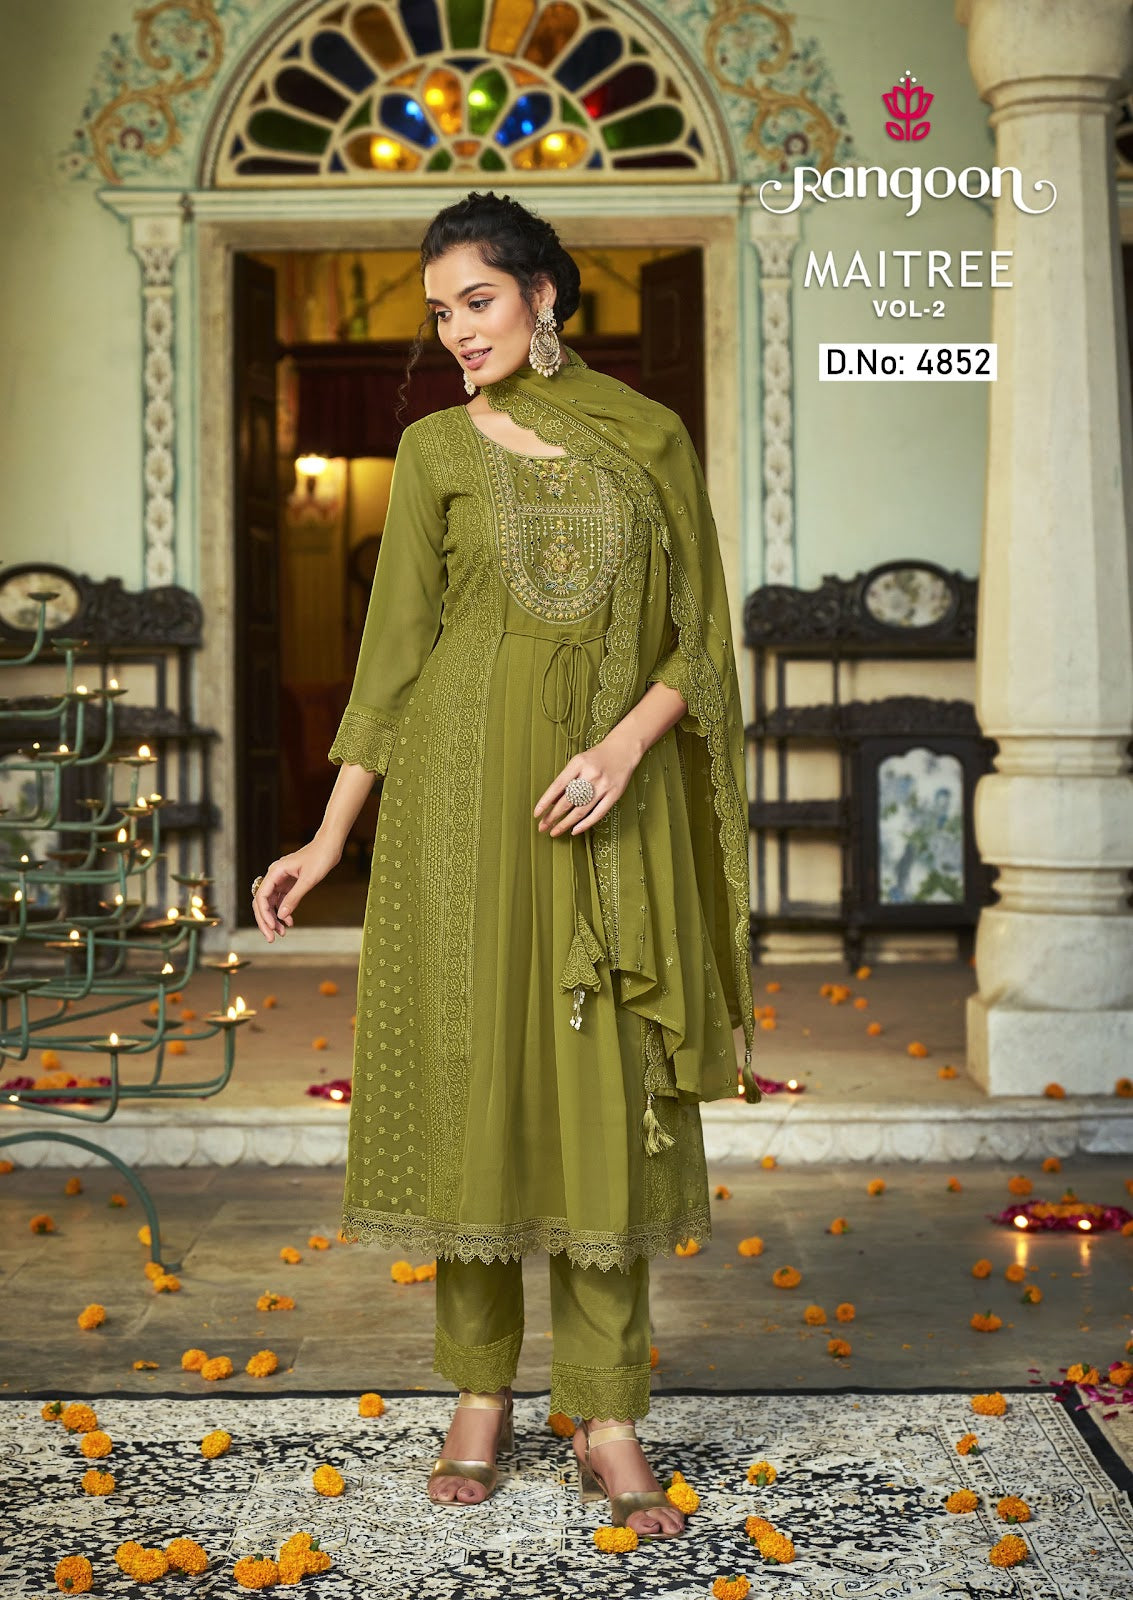 Maitree Vol 2 Rangoon Georgette Readymade Pant Style Suits